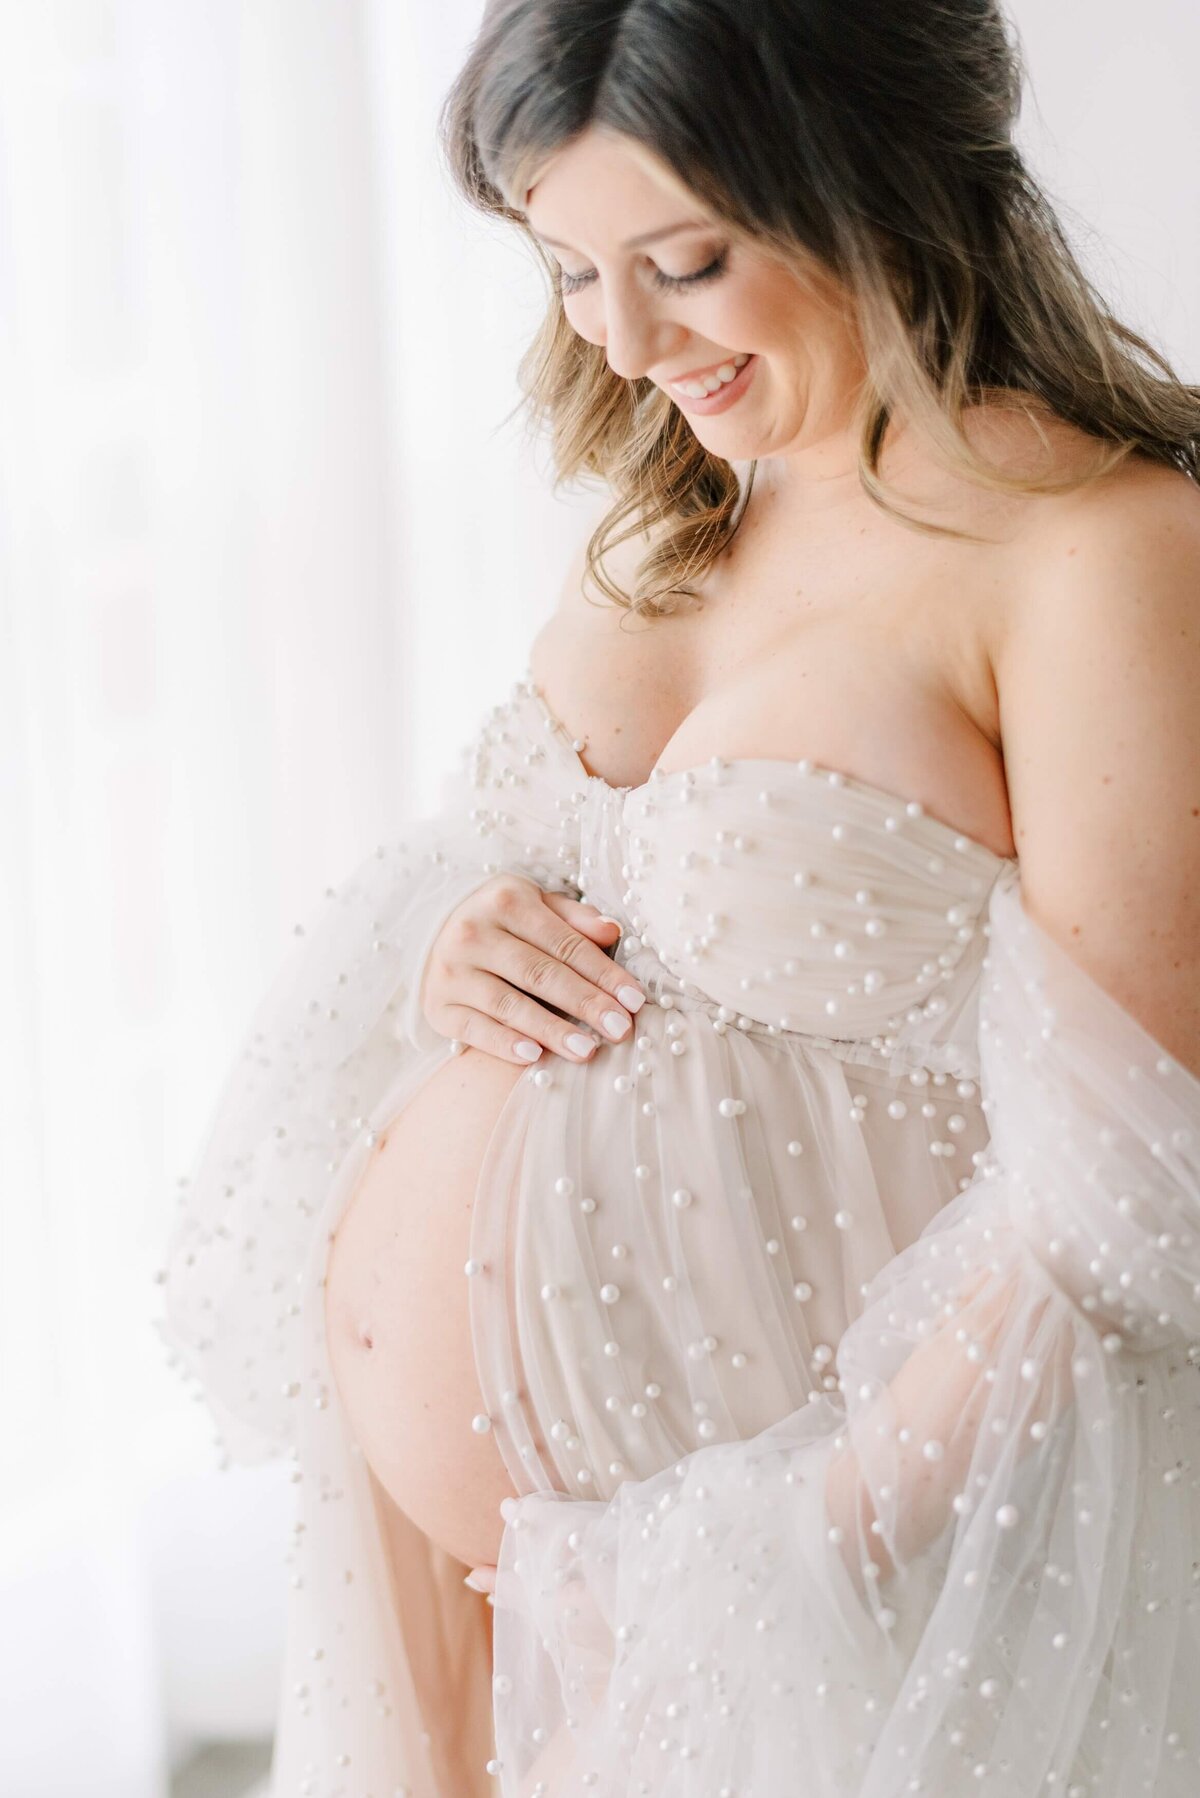 Pregnant woman looks down at her belly peeking out from a tulle gown with pearls